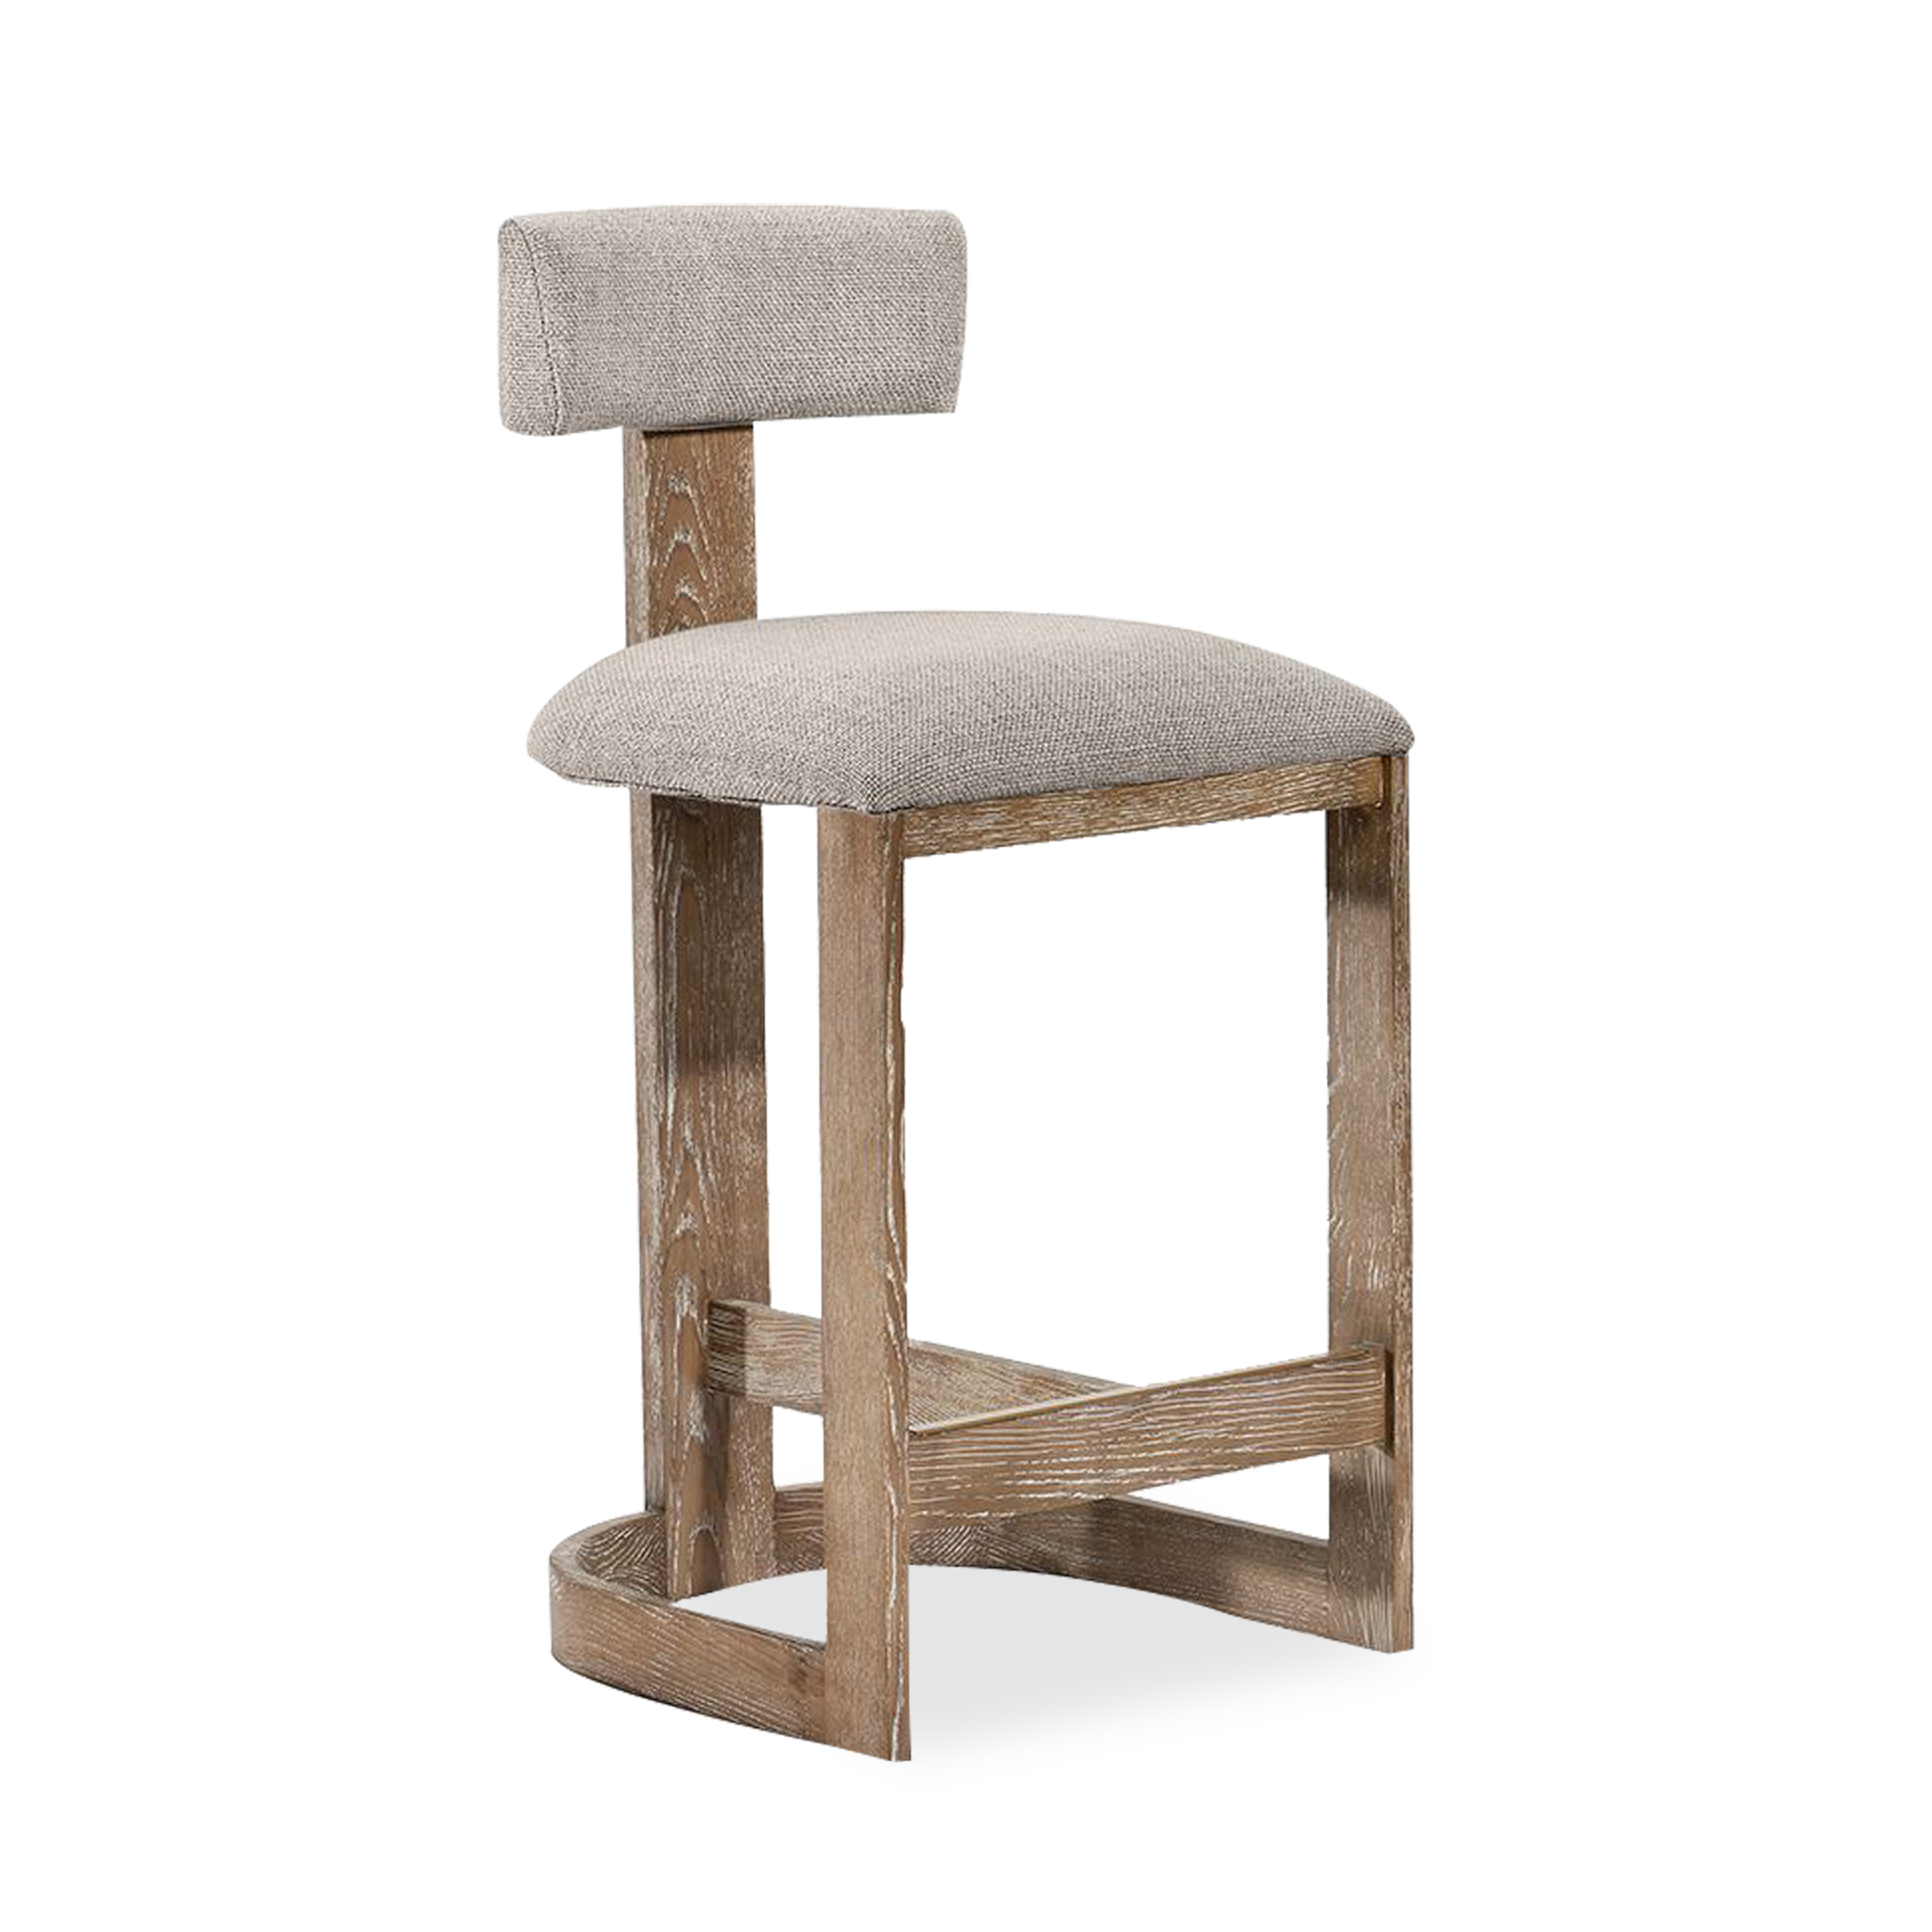 Bold and minimal, the Brooklyn Counter Stool will bring an organic touch to your space.